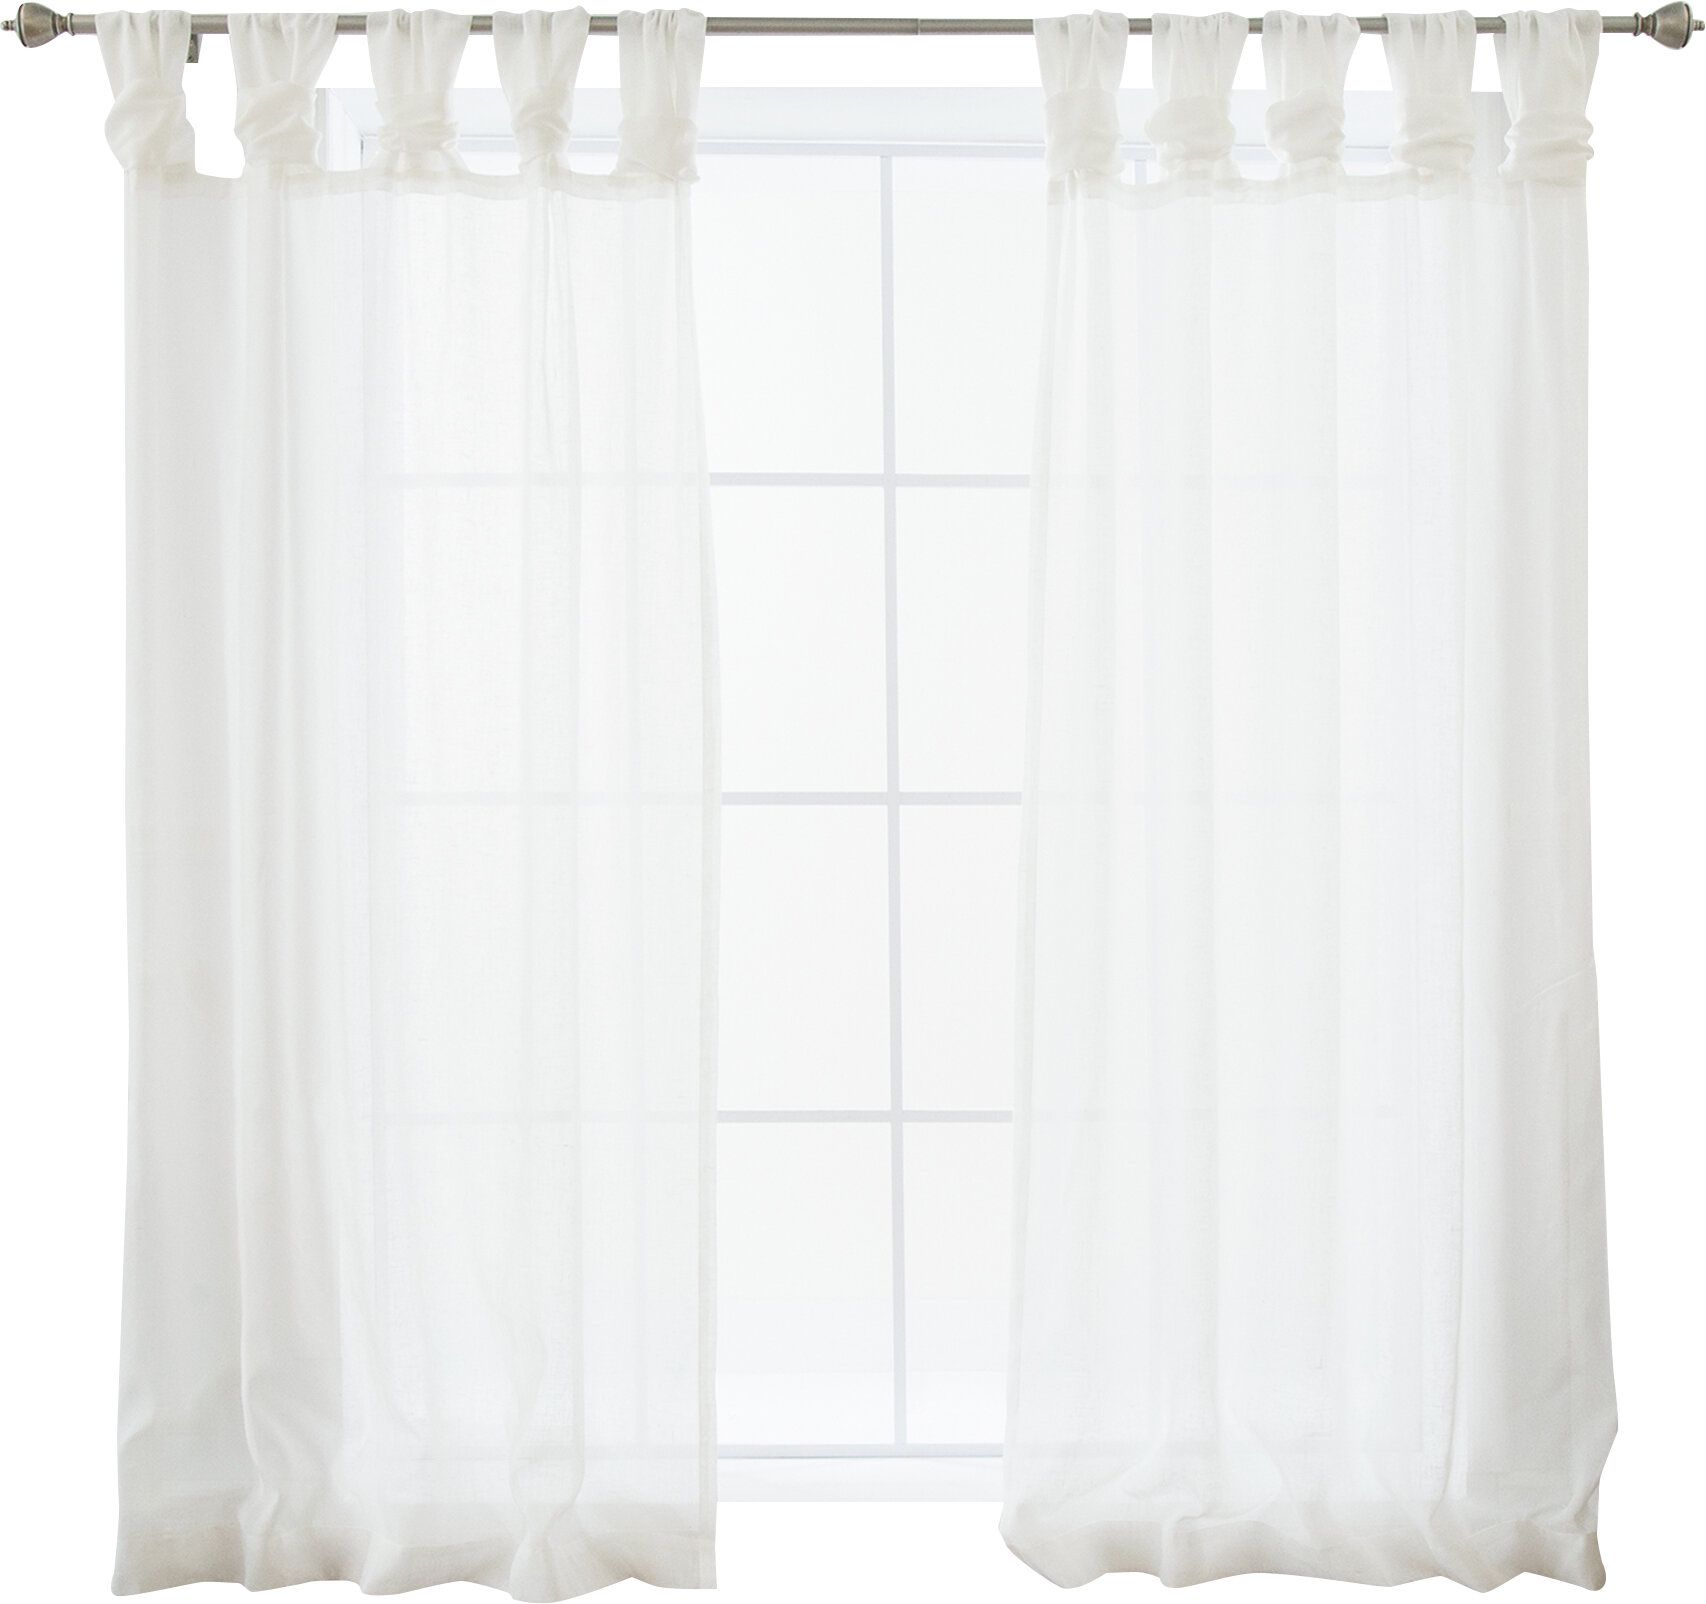 Millie Twist Faux Linen Solid Sheer Tab Top Curtain Panels In Twisted Tab Lined Single Curtain Panels (View 18 of 30)